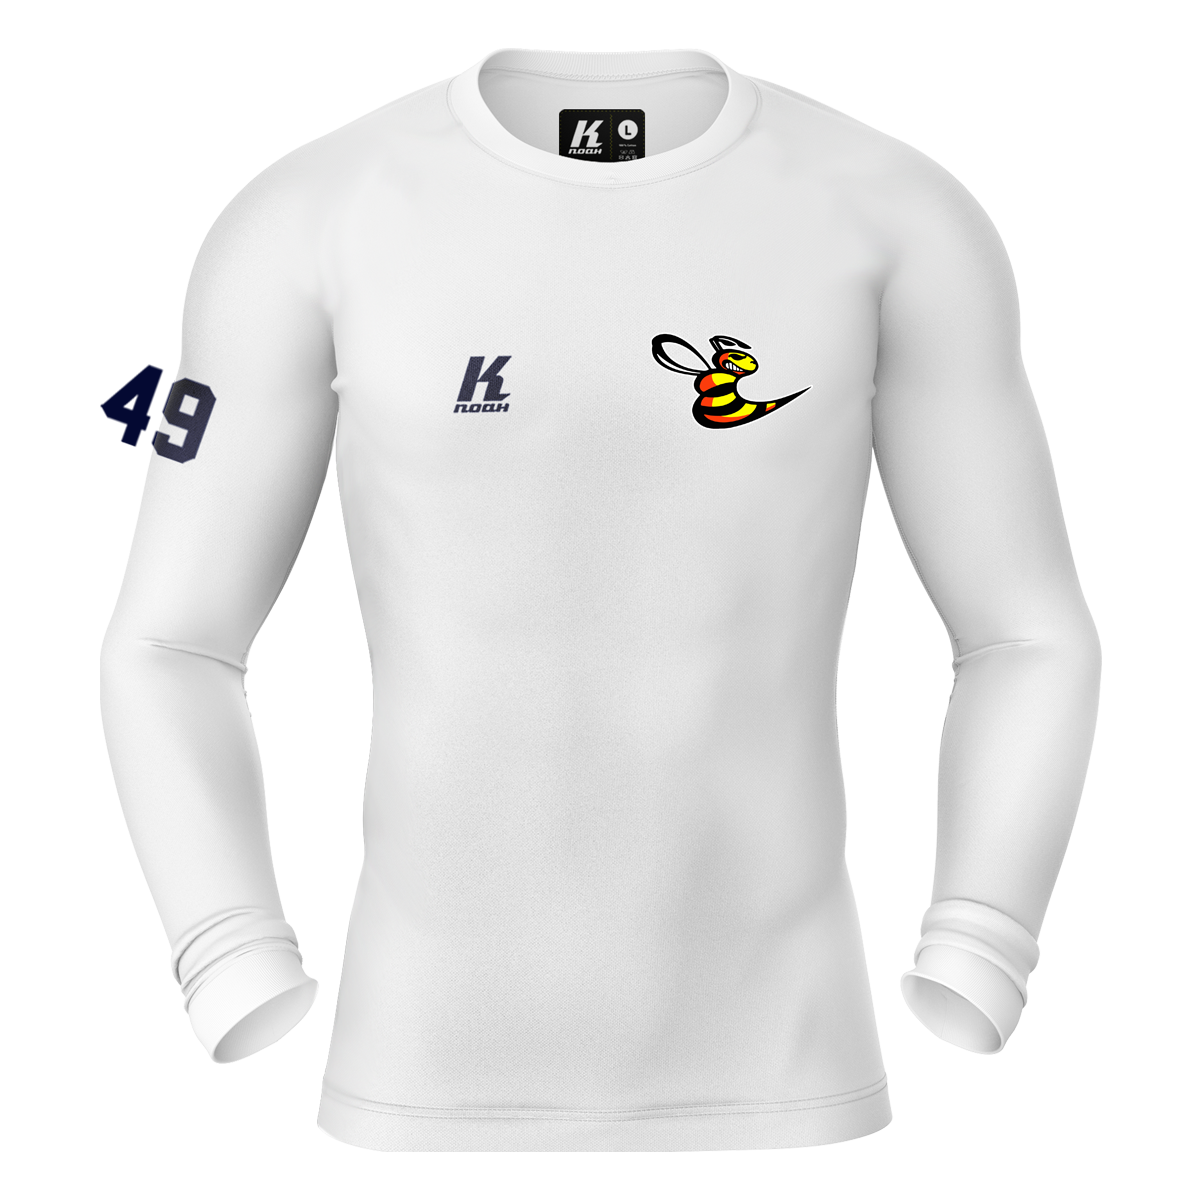 Hornets K.Tech Compression Longsleeve Shirt white with Playernumber/Initials